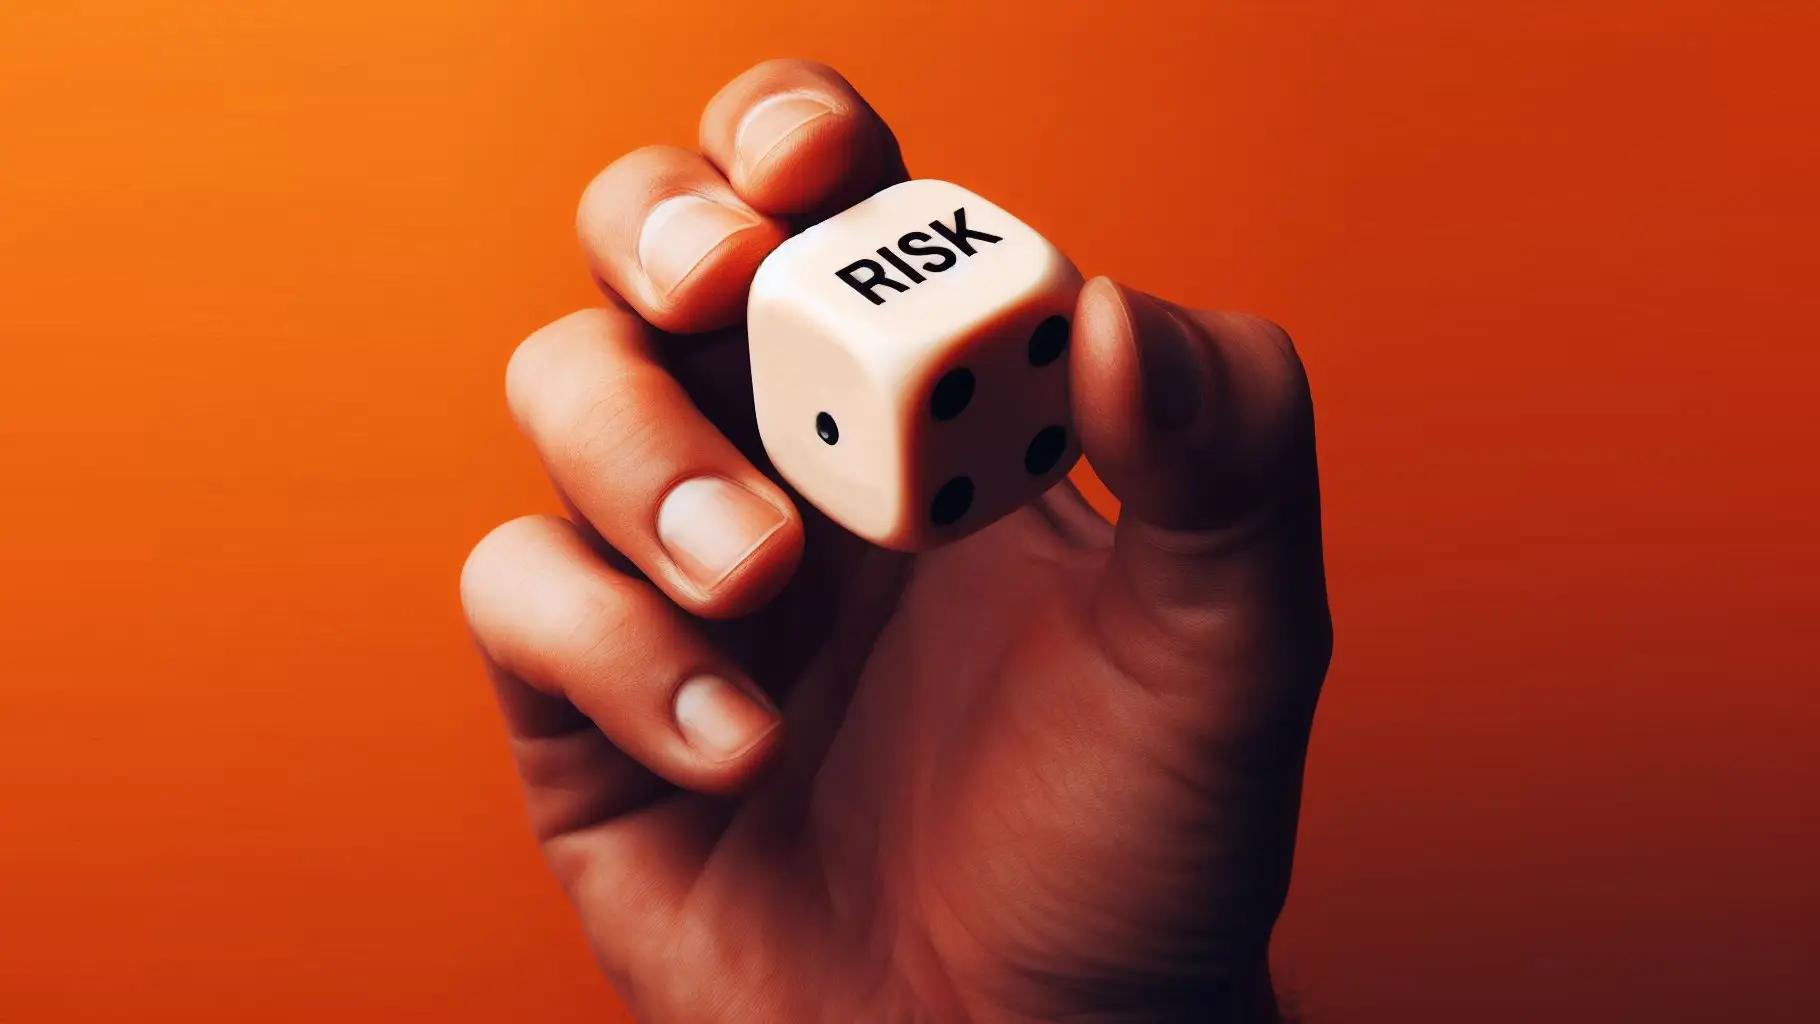 hand holding a dice where one side is labelled 'risk'